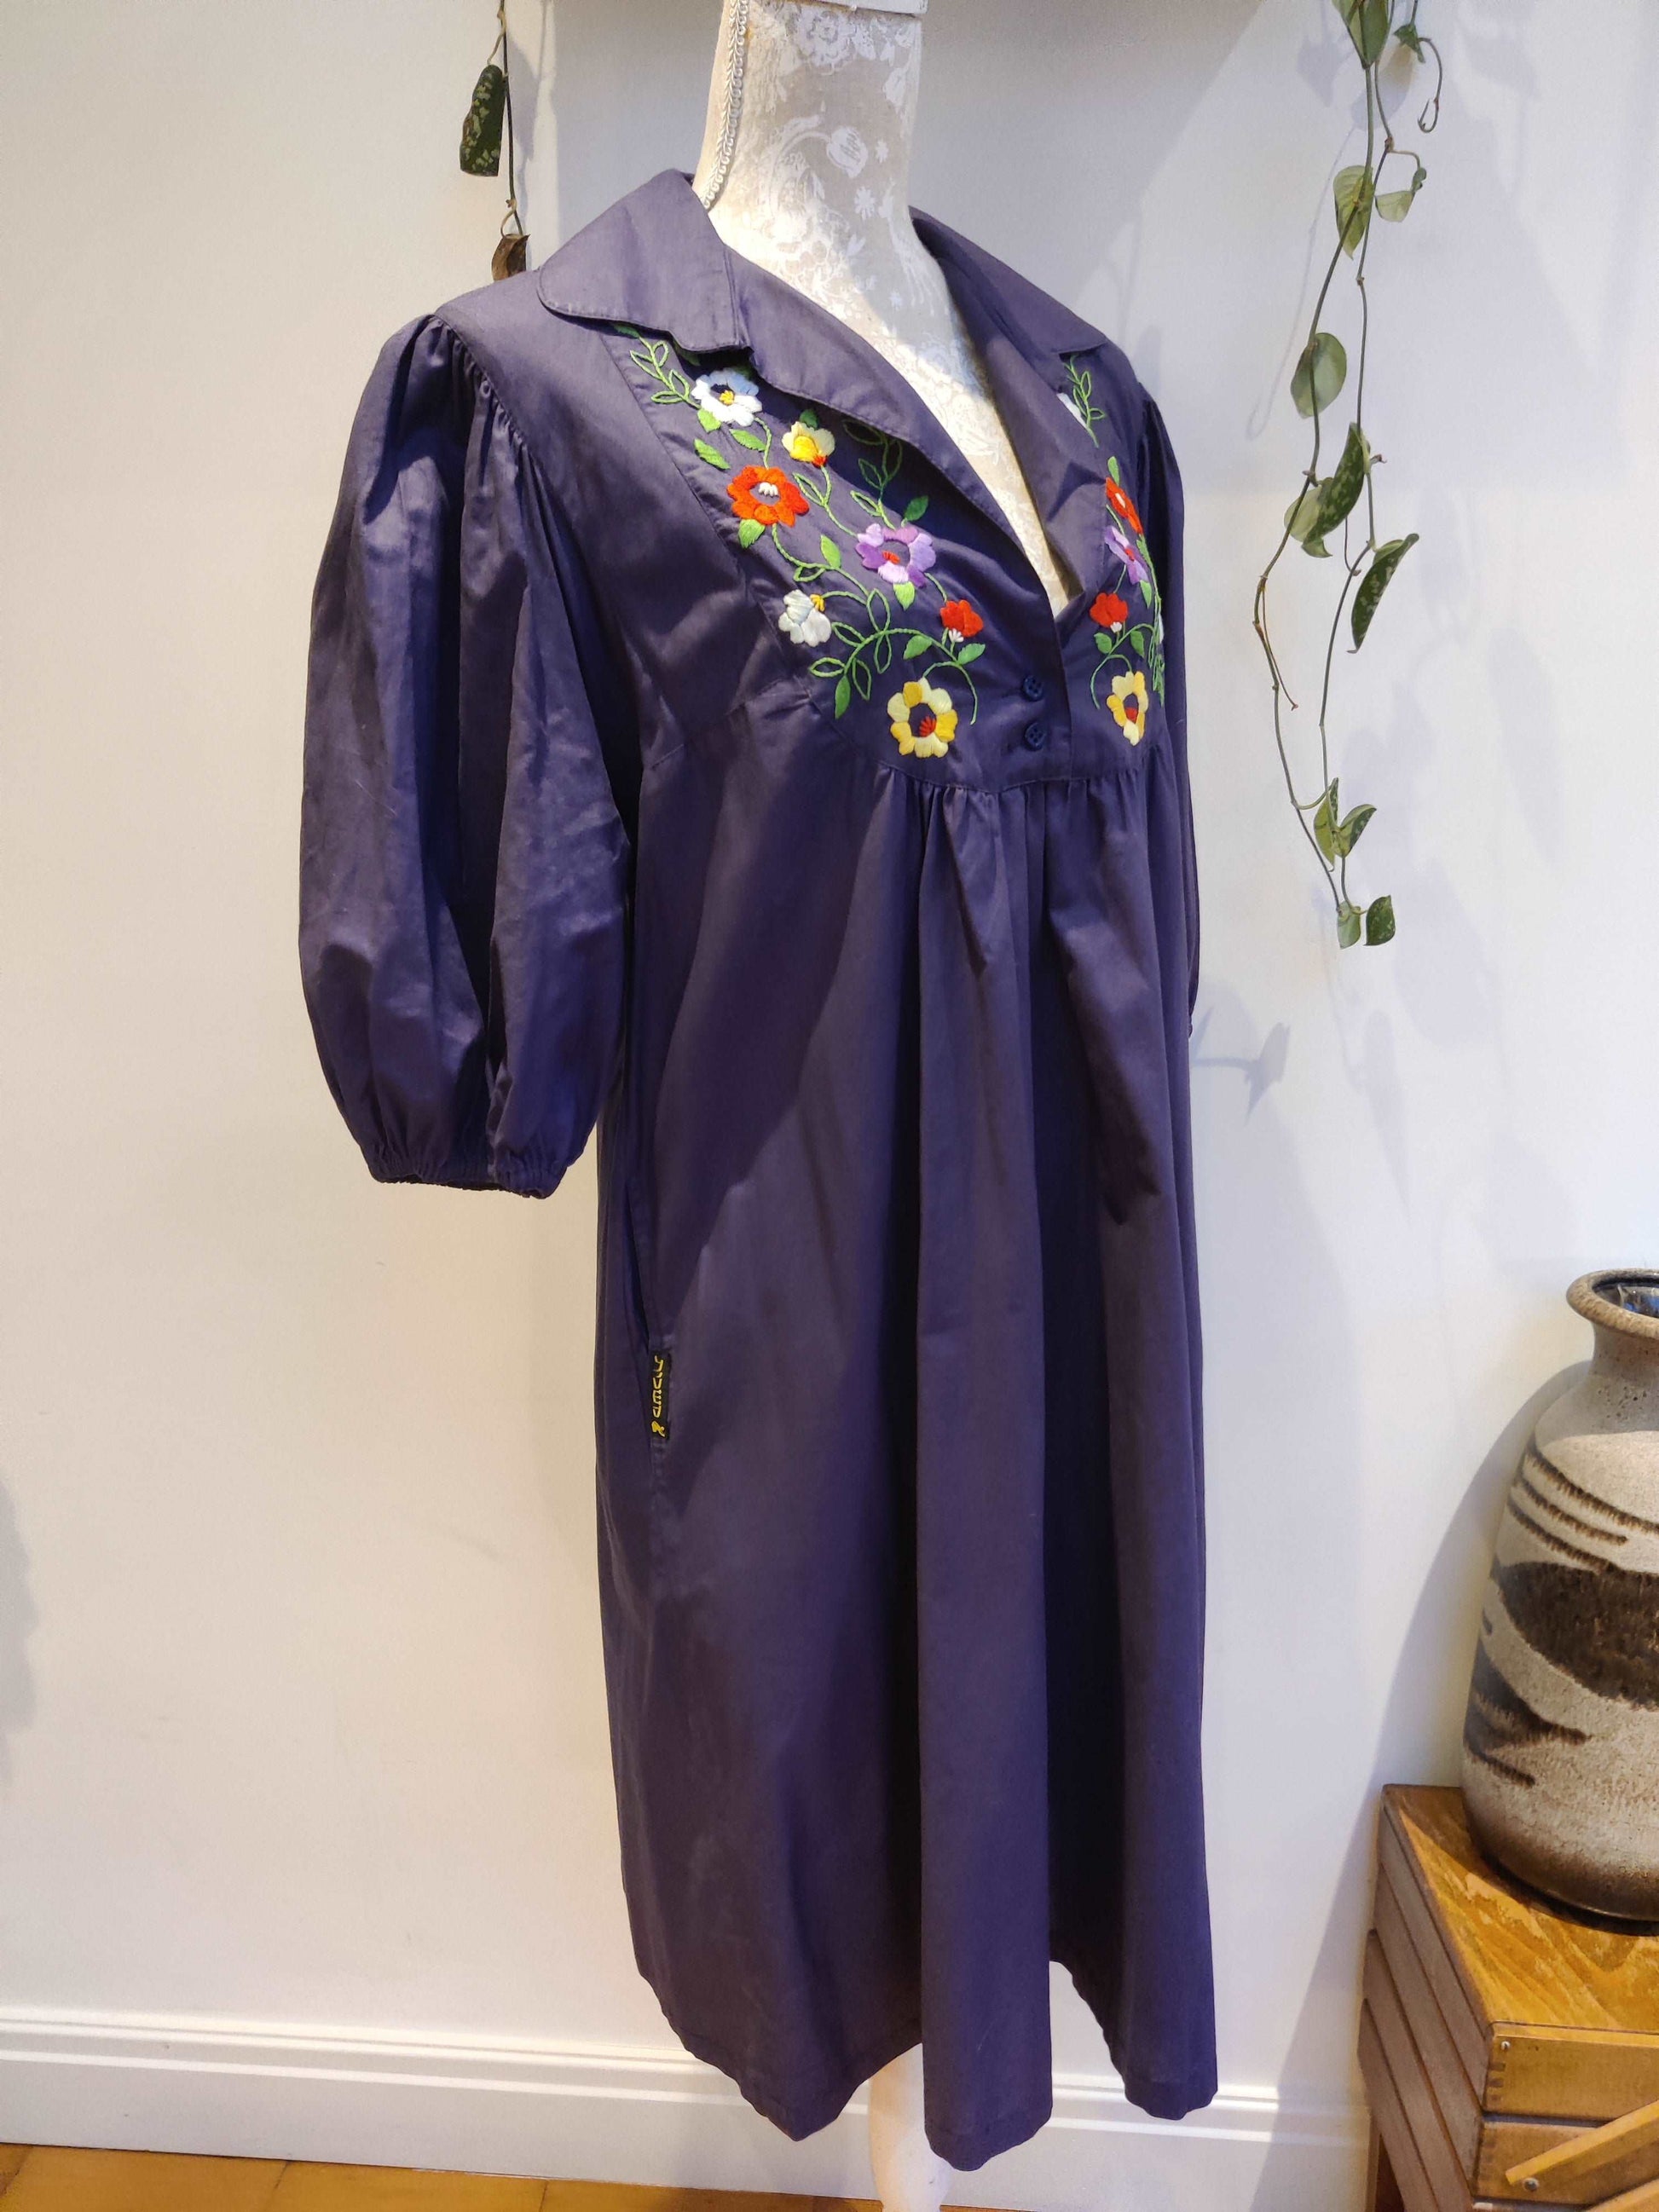 Beautiful blue smock dress with embroidered bib detail.